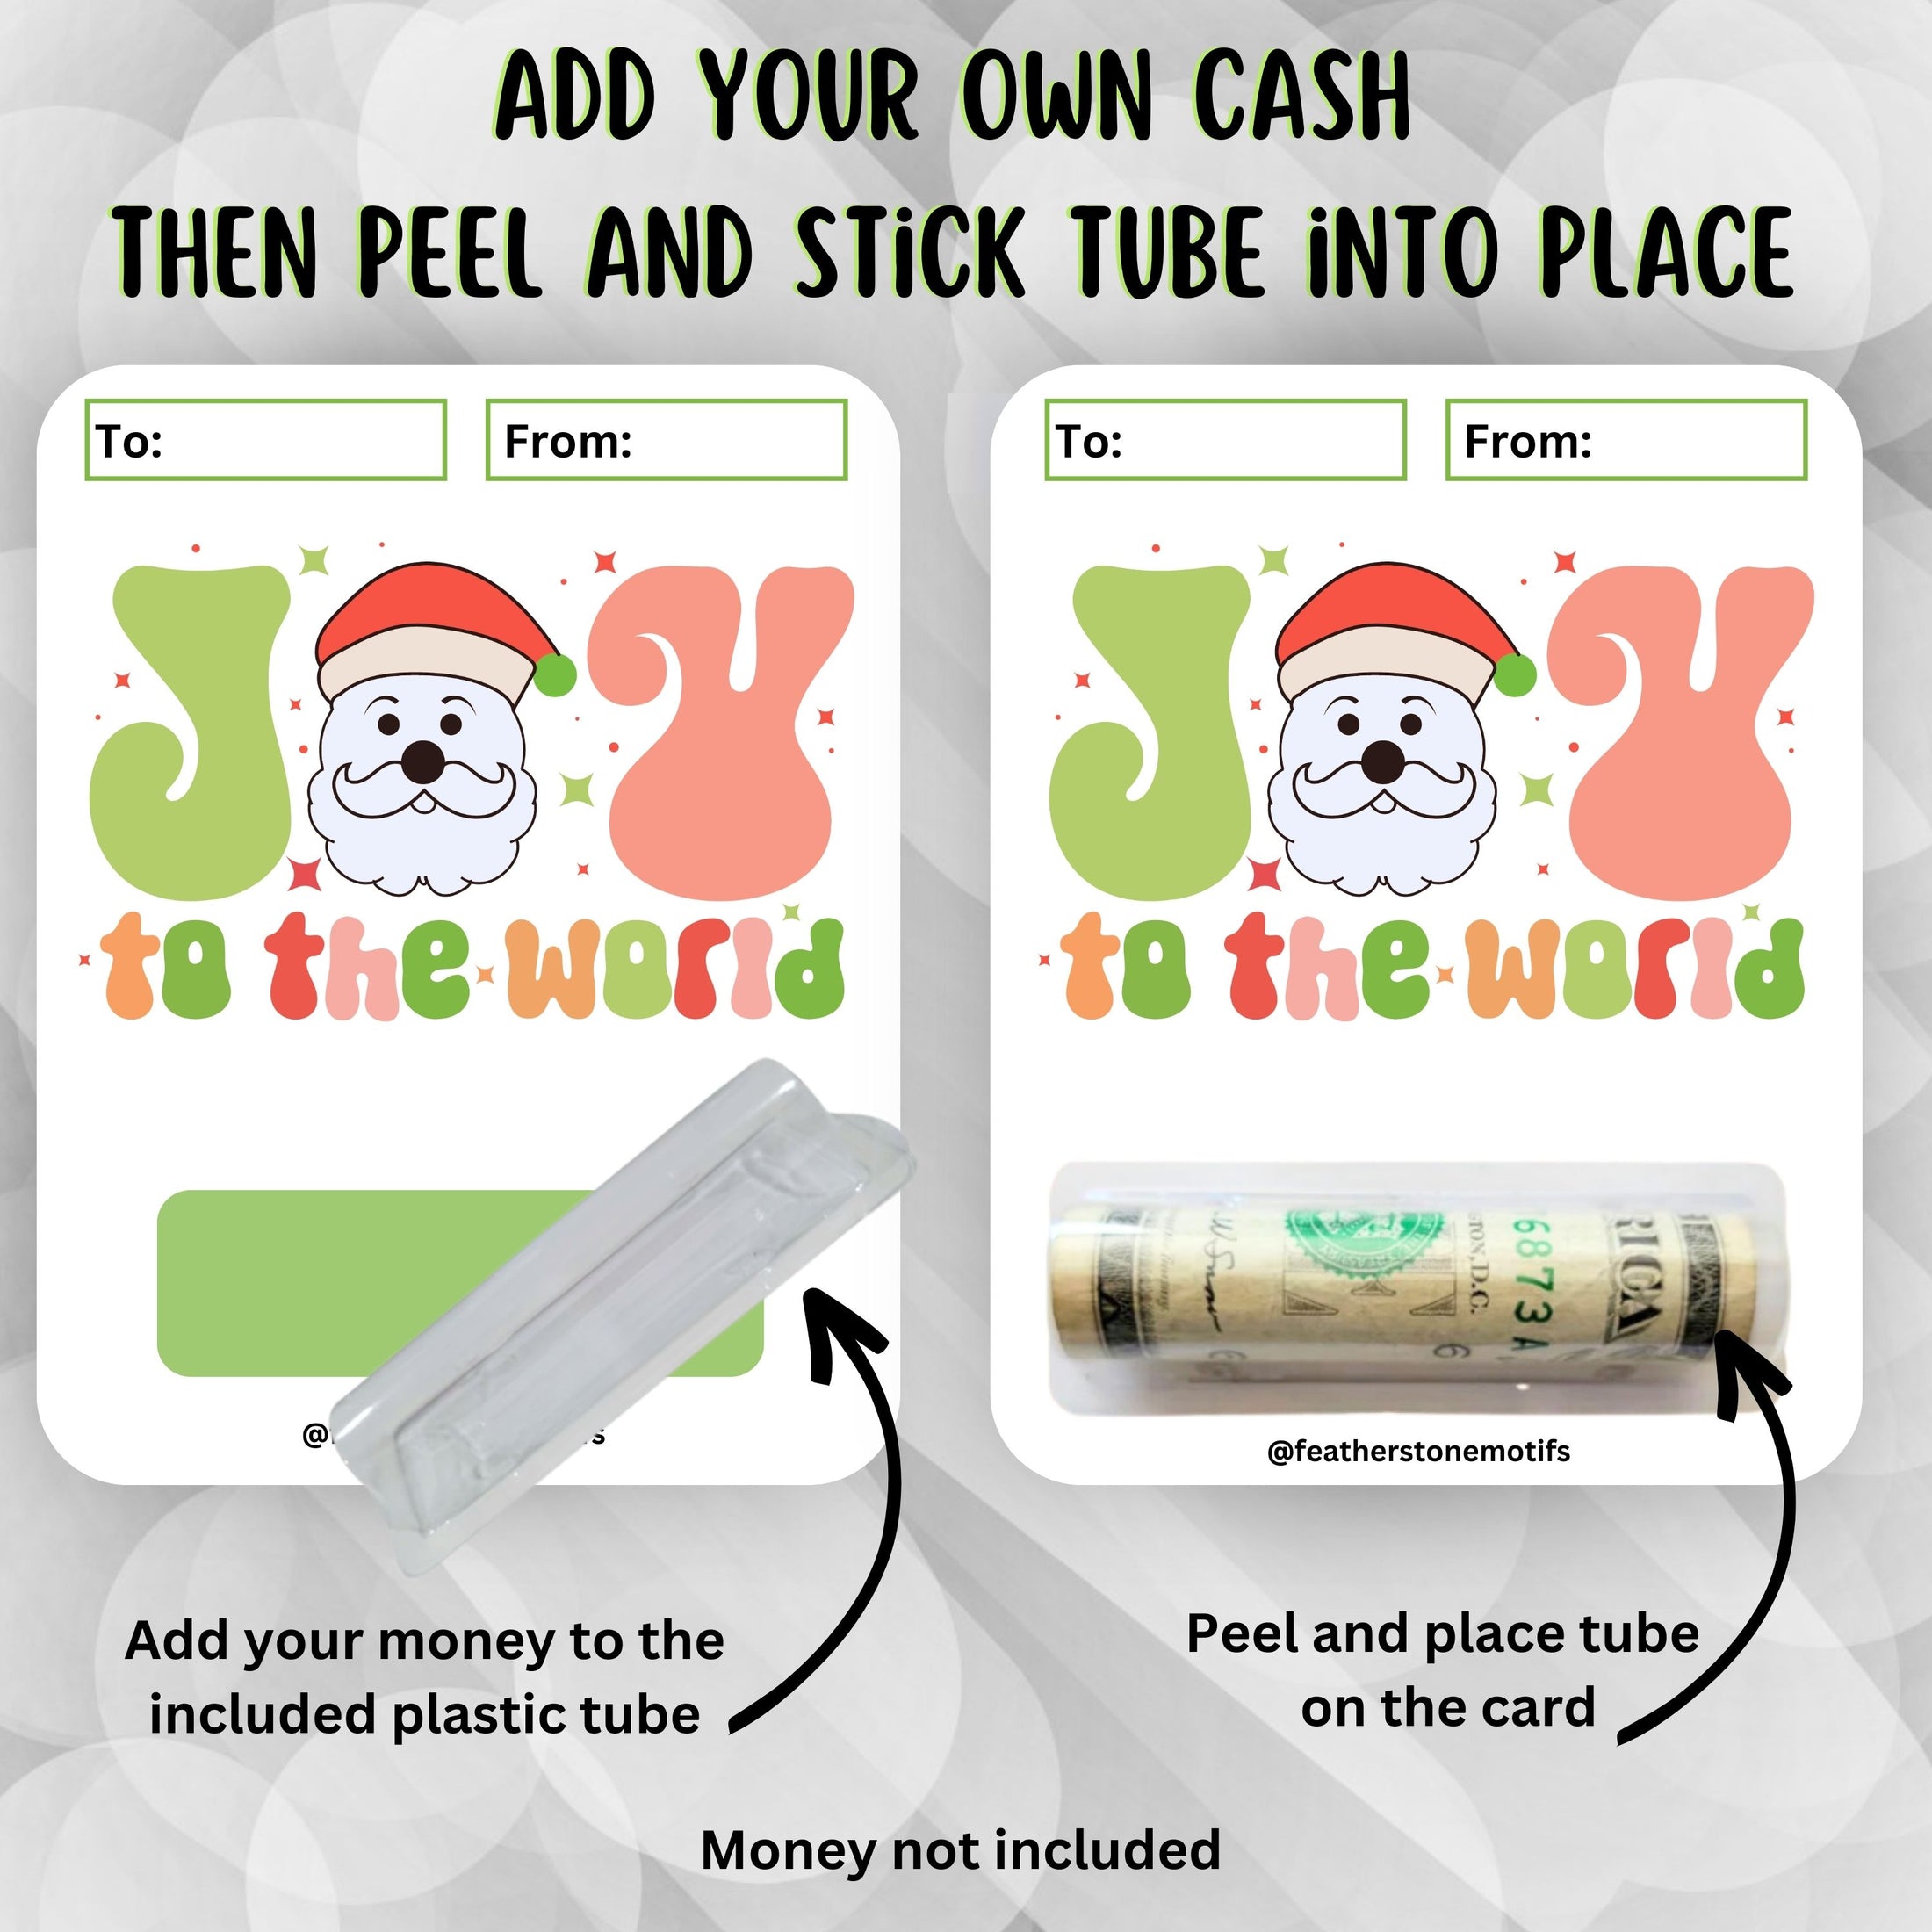 This image shows how to attach the money tube to the Joy to the World money card.